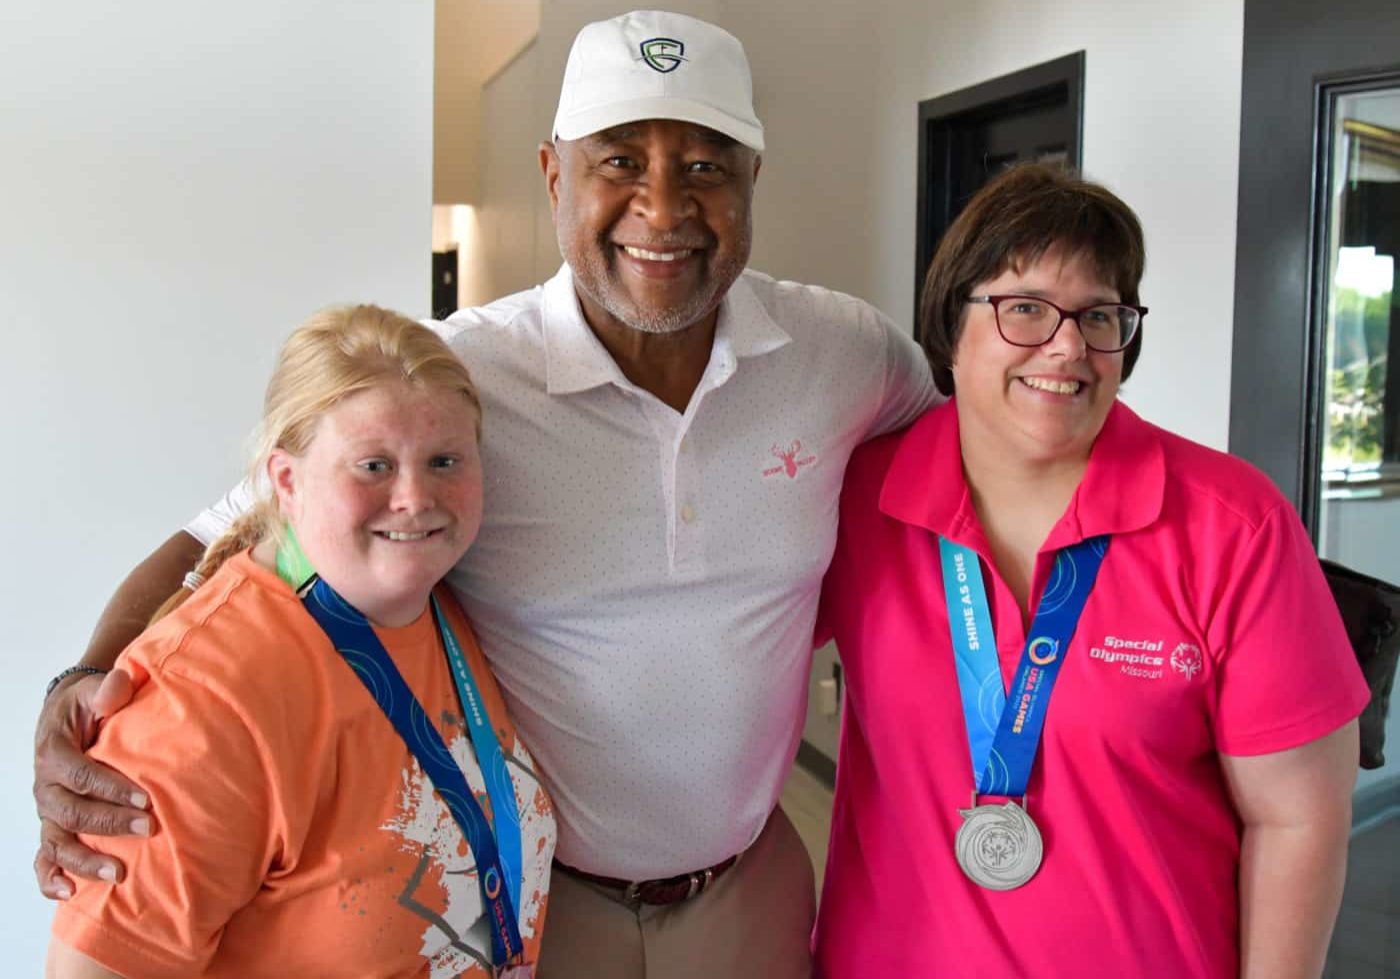 SOMO athletes Ozzie Smith and Abby Bax pose for a picture with Cardinals legend Ozzie Smith at Eagle Knoll Golf Club on Monday, July 18, 2022.